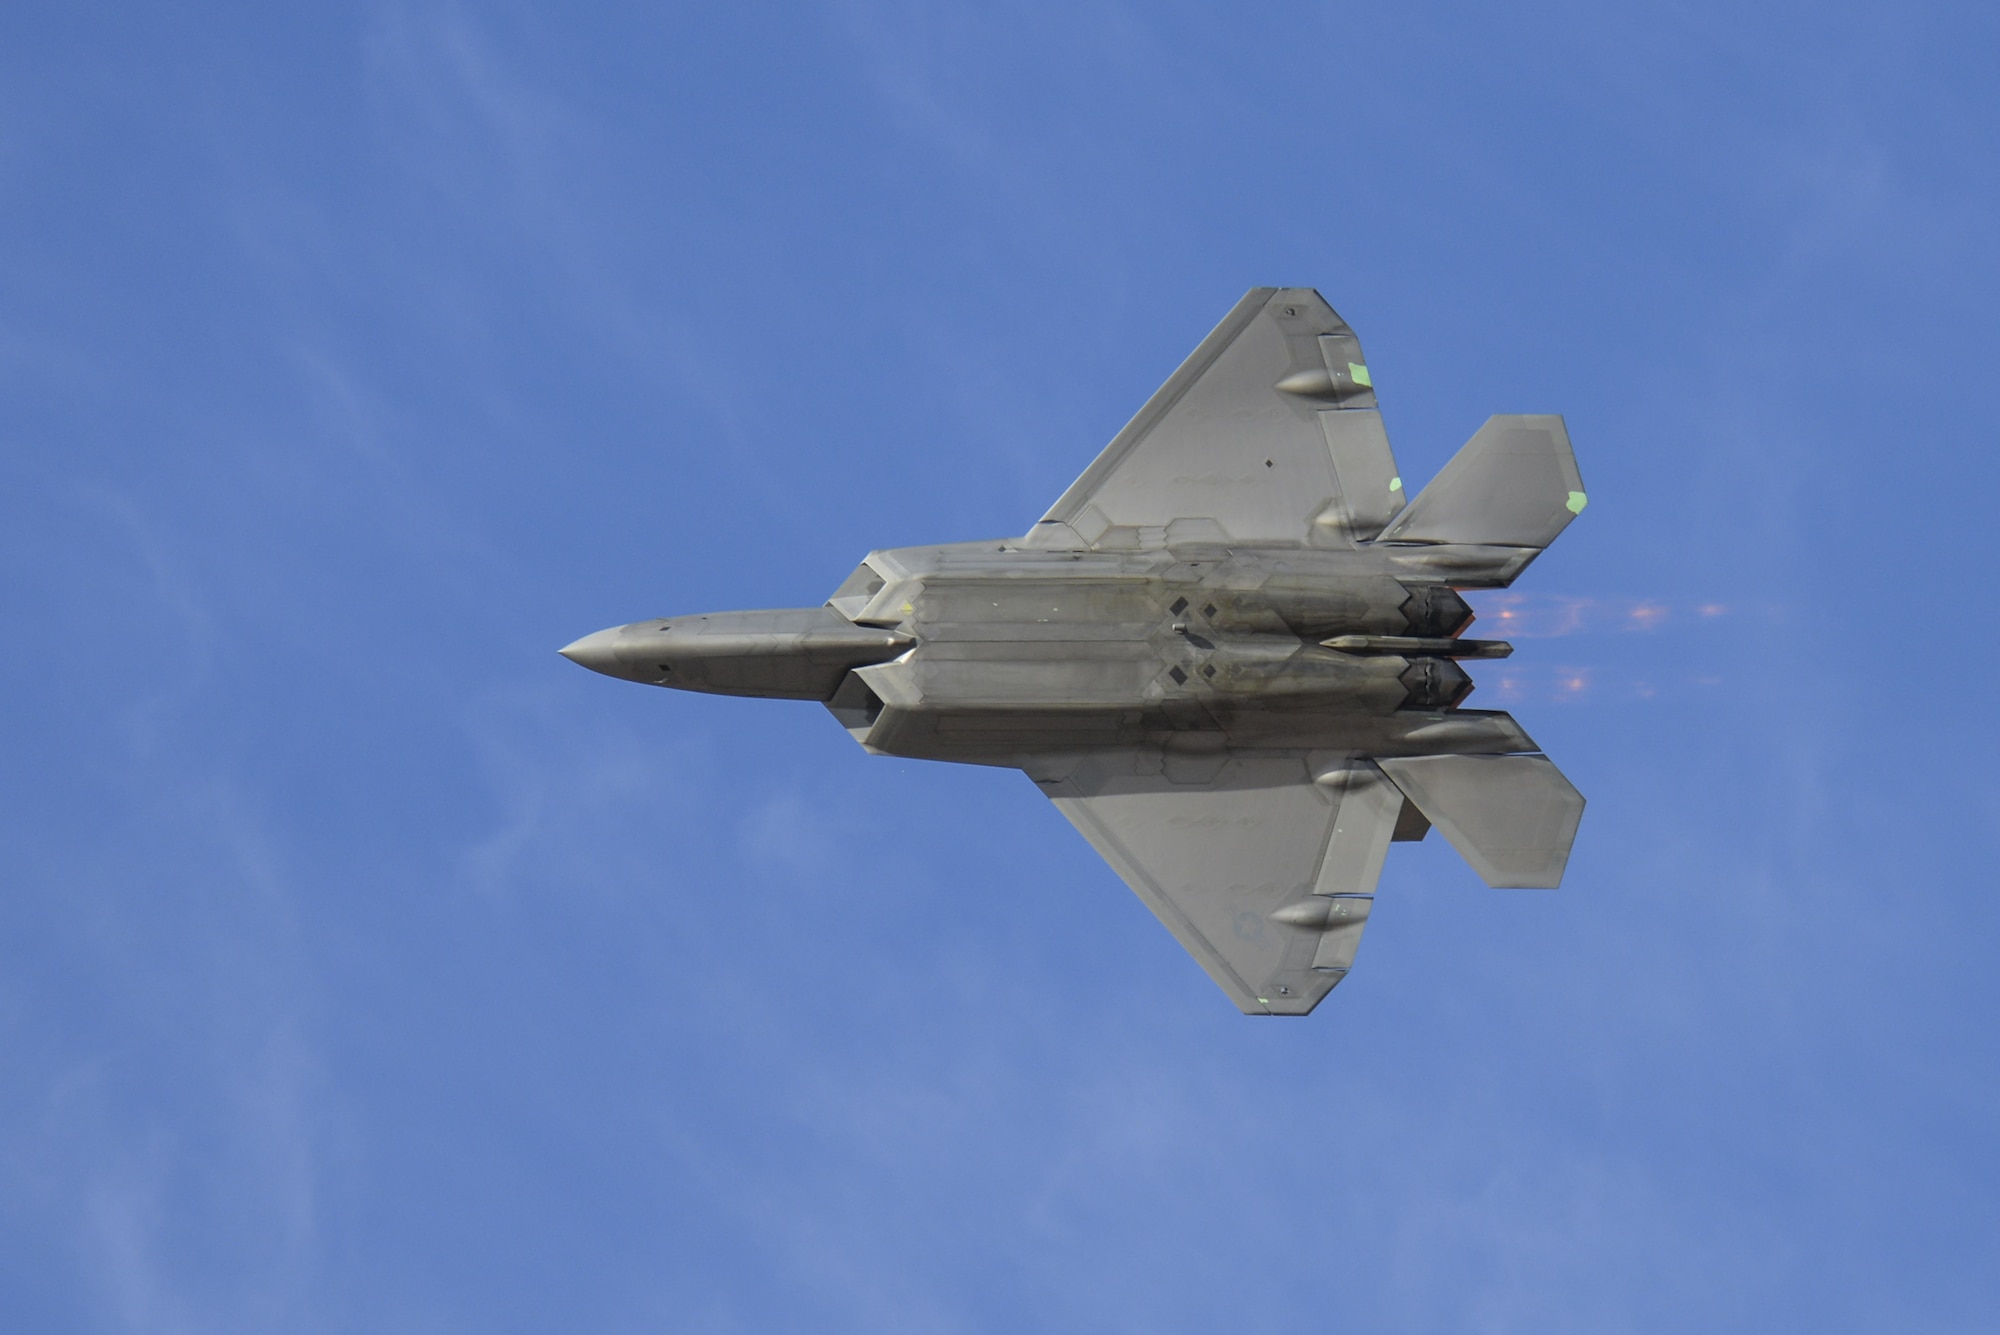 A U.S. Air Force F-22 Raptor performs an aerial maneuver during the 2016 Heritage Flight Training and Certification Course at Davis-Monthan Air Force Base, Ariz., March 4, 2016. The Raptor performs both air-to-air and air-to-ground missions allowing full realization of operational concepts vital to the 21st century Air Force. (U.S. Air Force photo by Senior Airman Chris Massey/Released